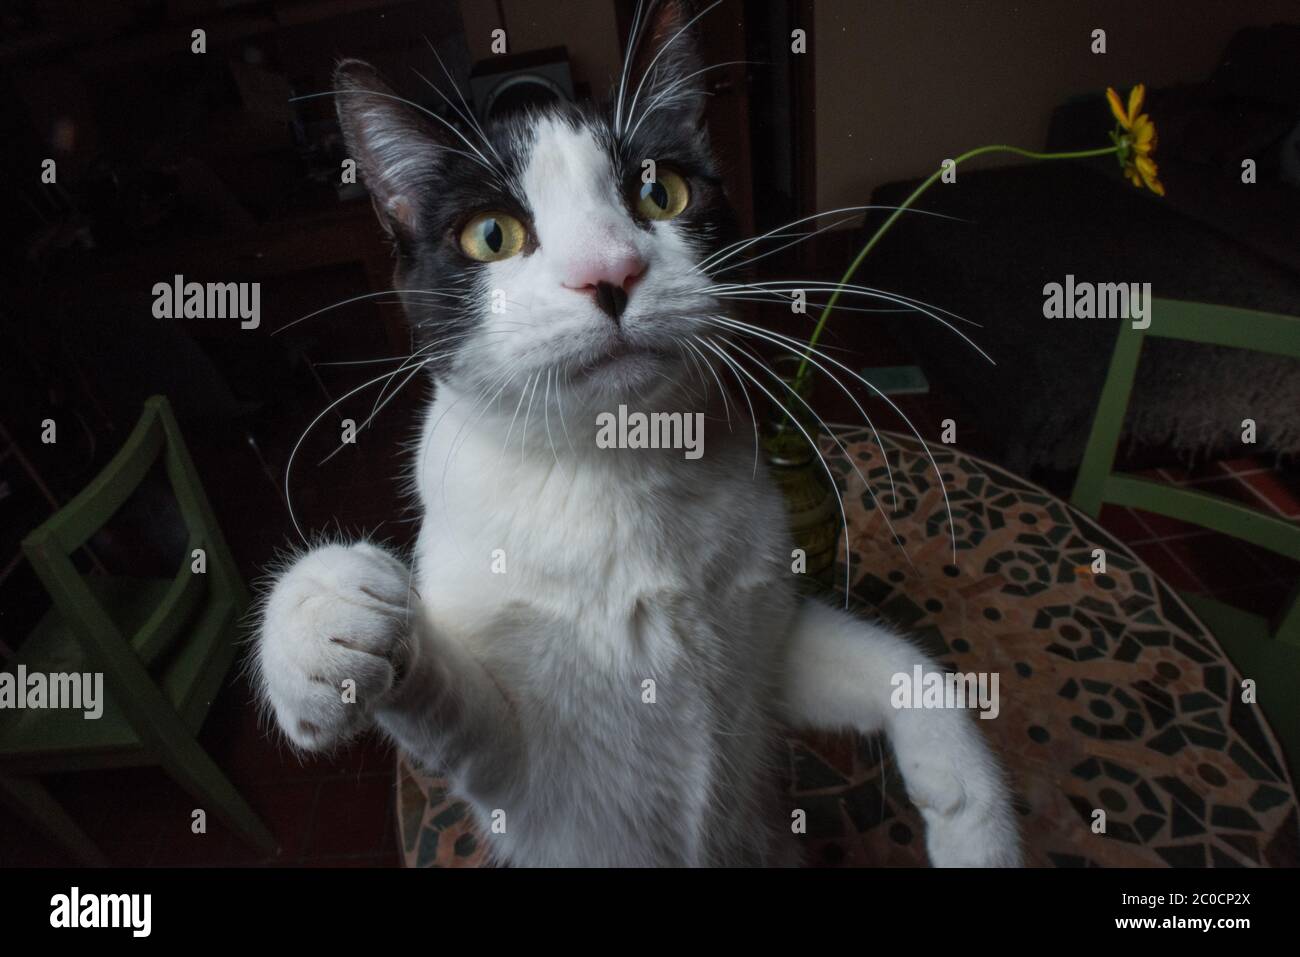 A black and white pet cat stares up at the camera making eye contact. Stock Photo